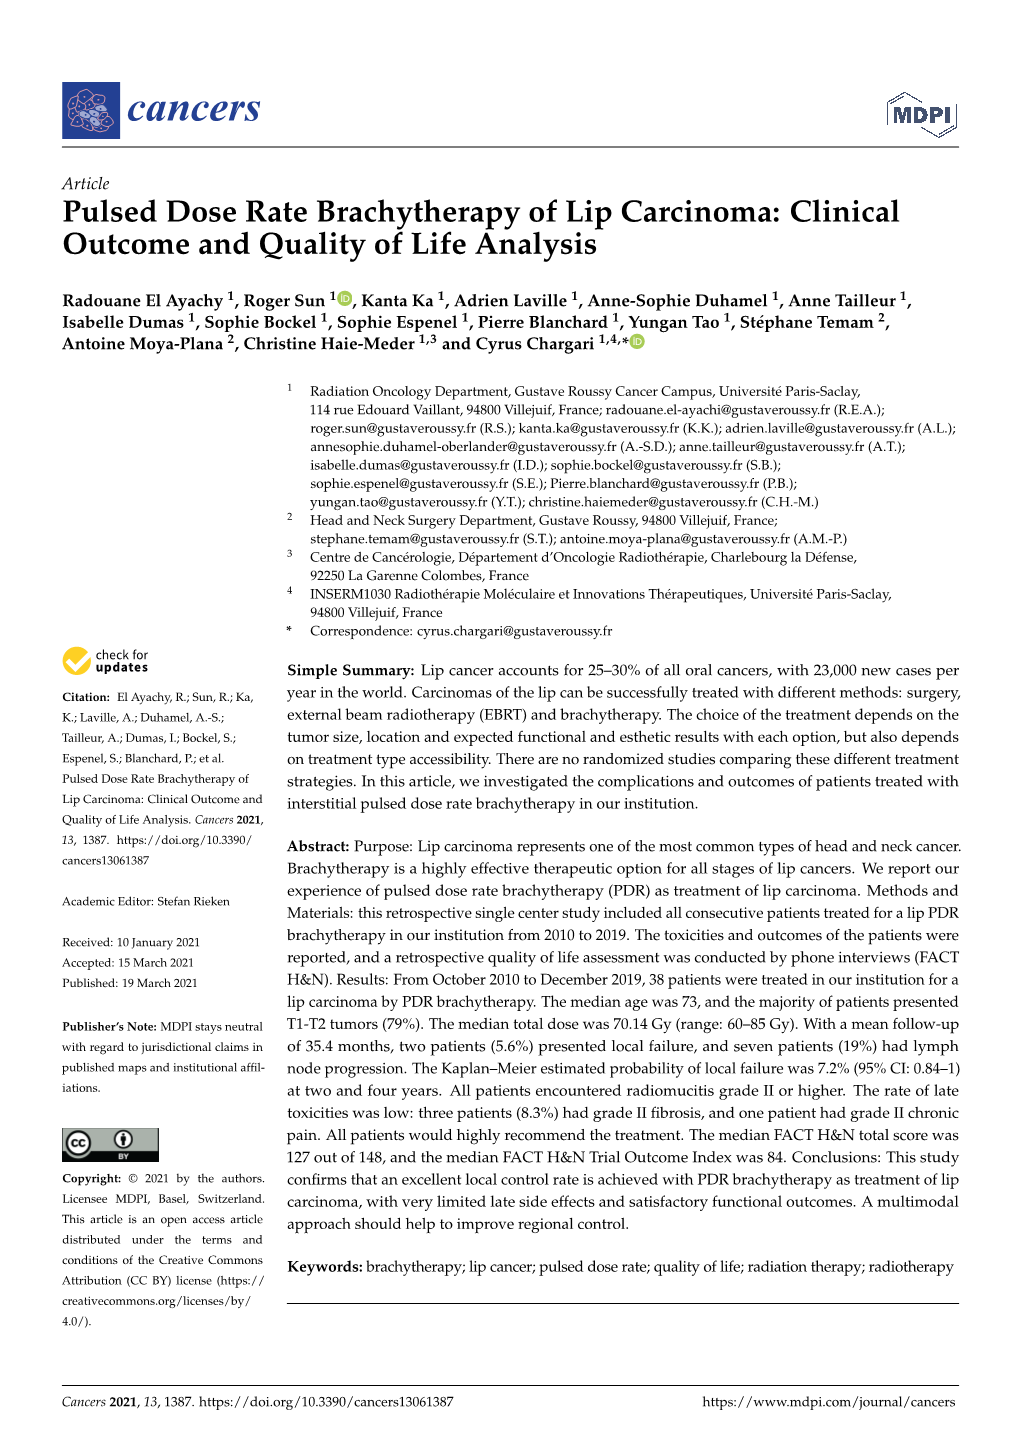 Pulsed Dose Rate Brachytherapy of Lip Carcinoma: Clinical Outcome and Quality of Life Analysis